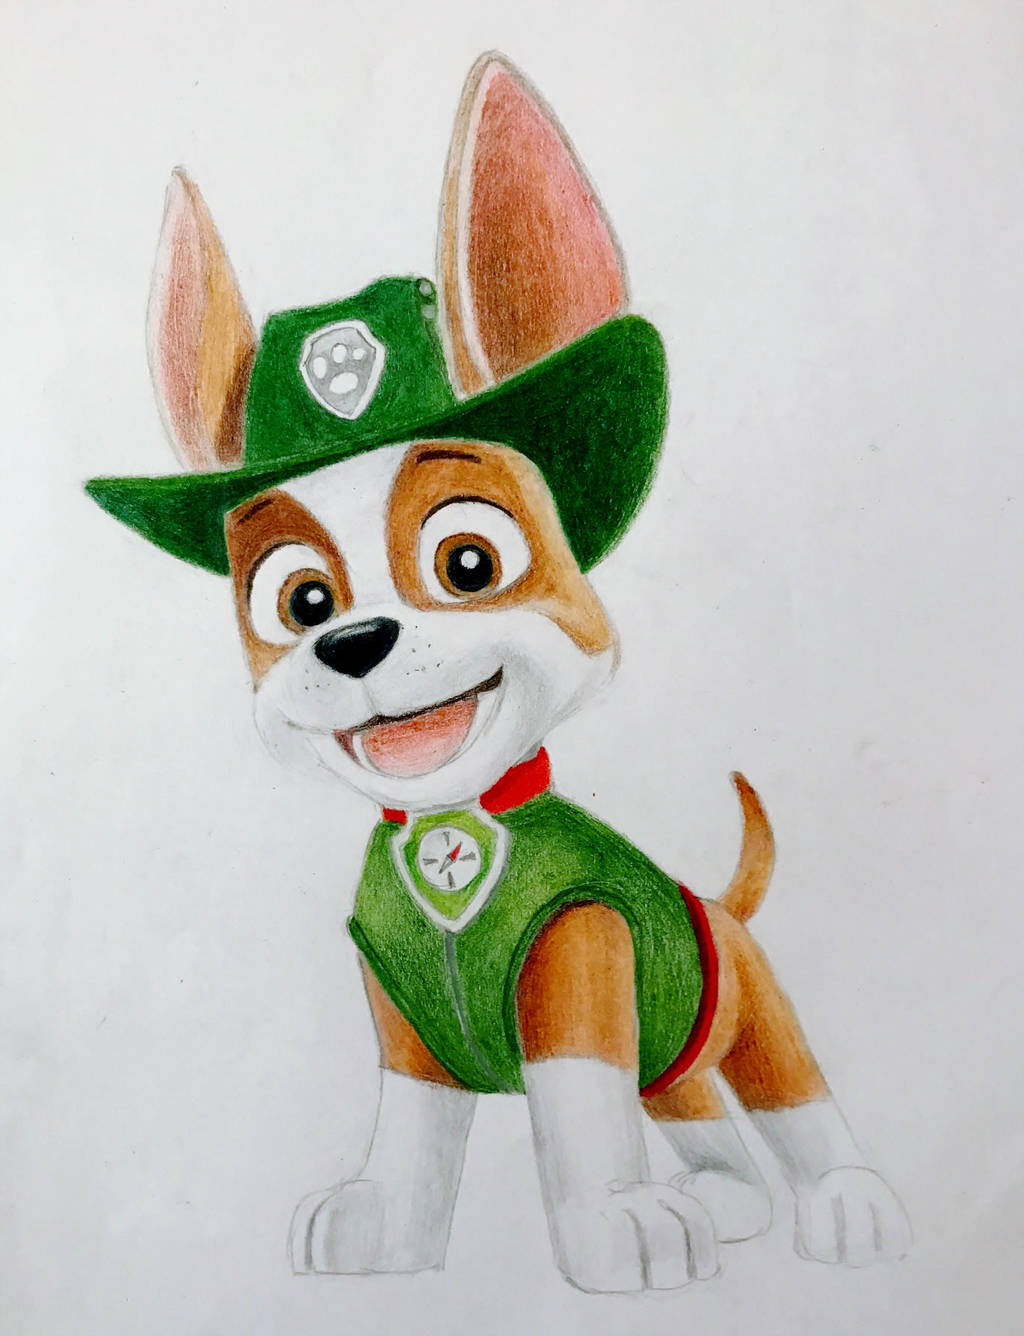 PAW Patrol Tracker by TheKissingHand on DeviantArt